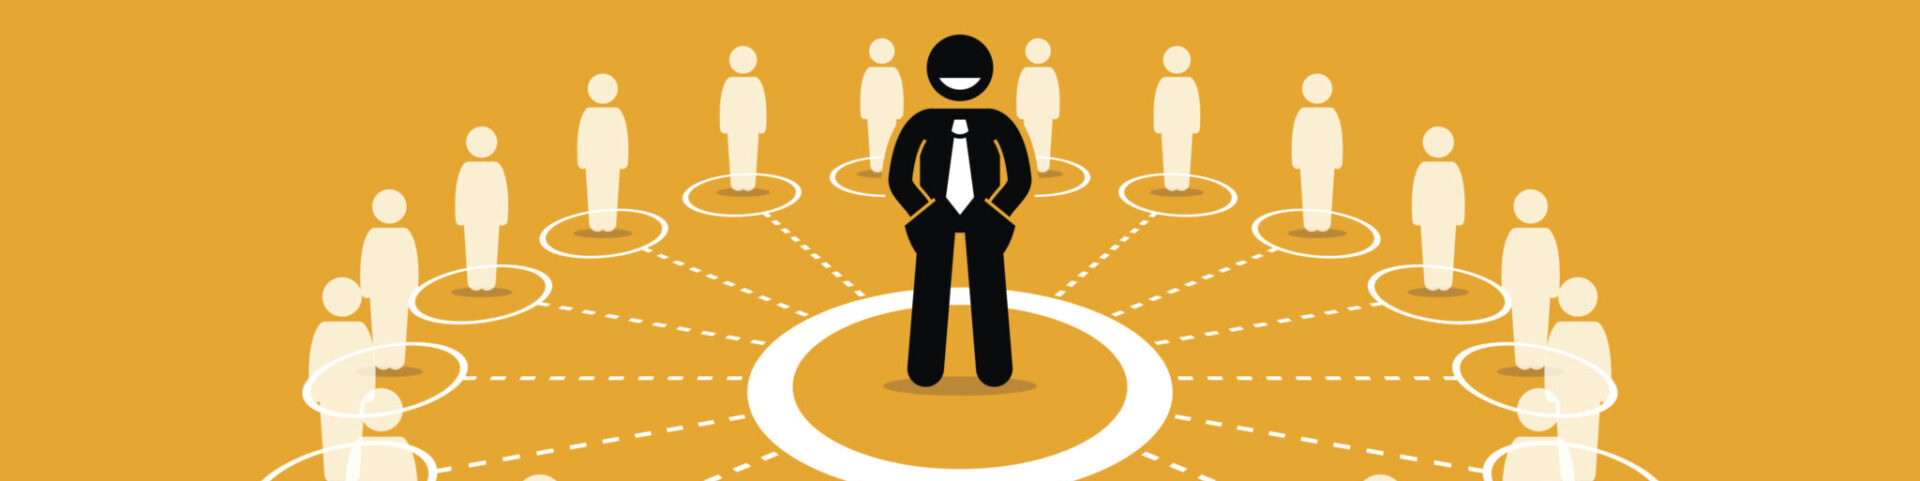 A businessman stands among an evenly distributed workforce on a gold background